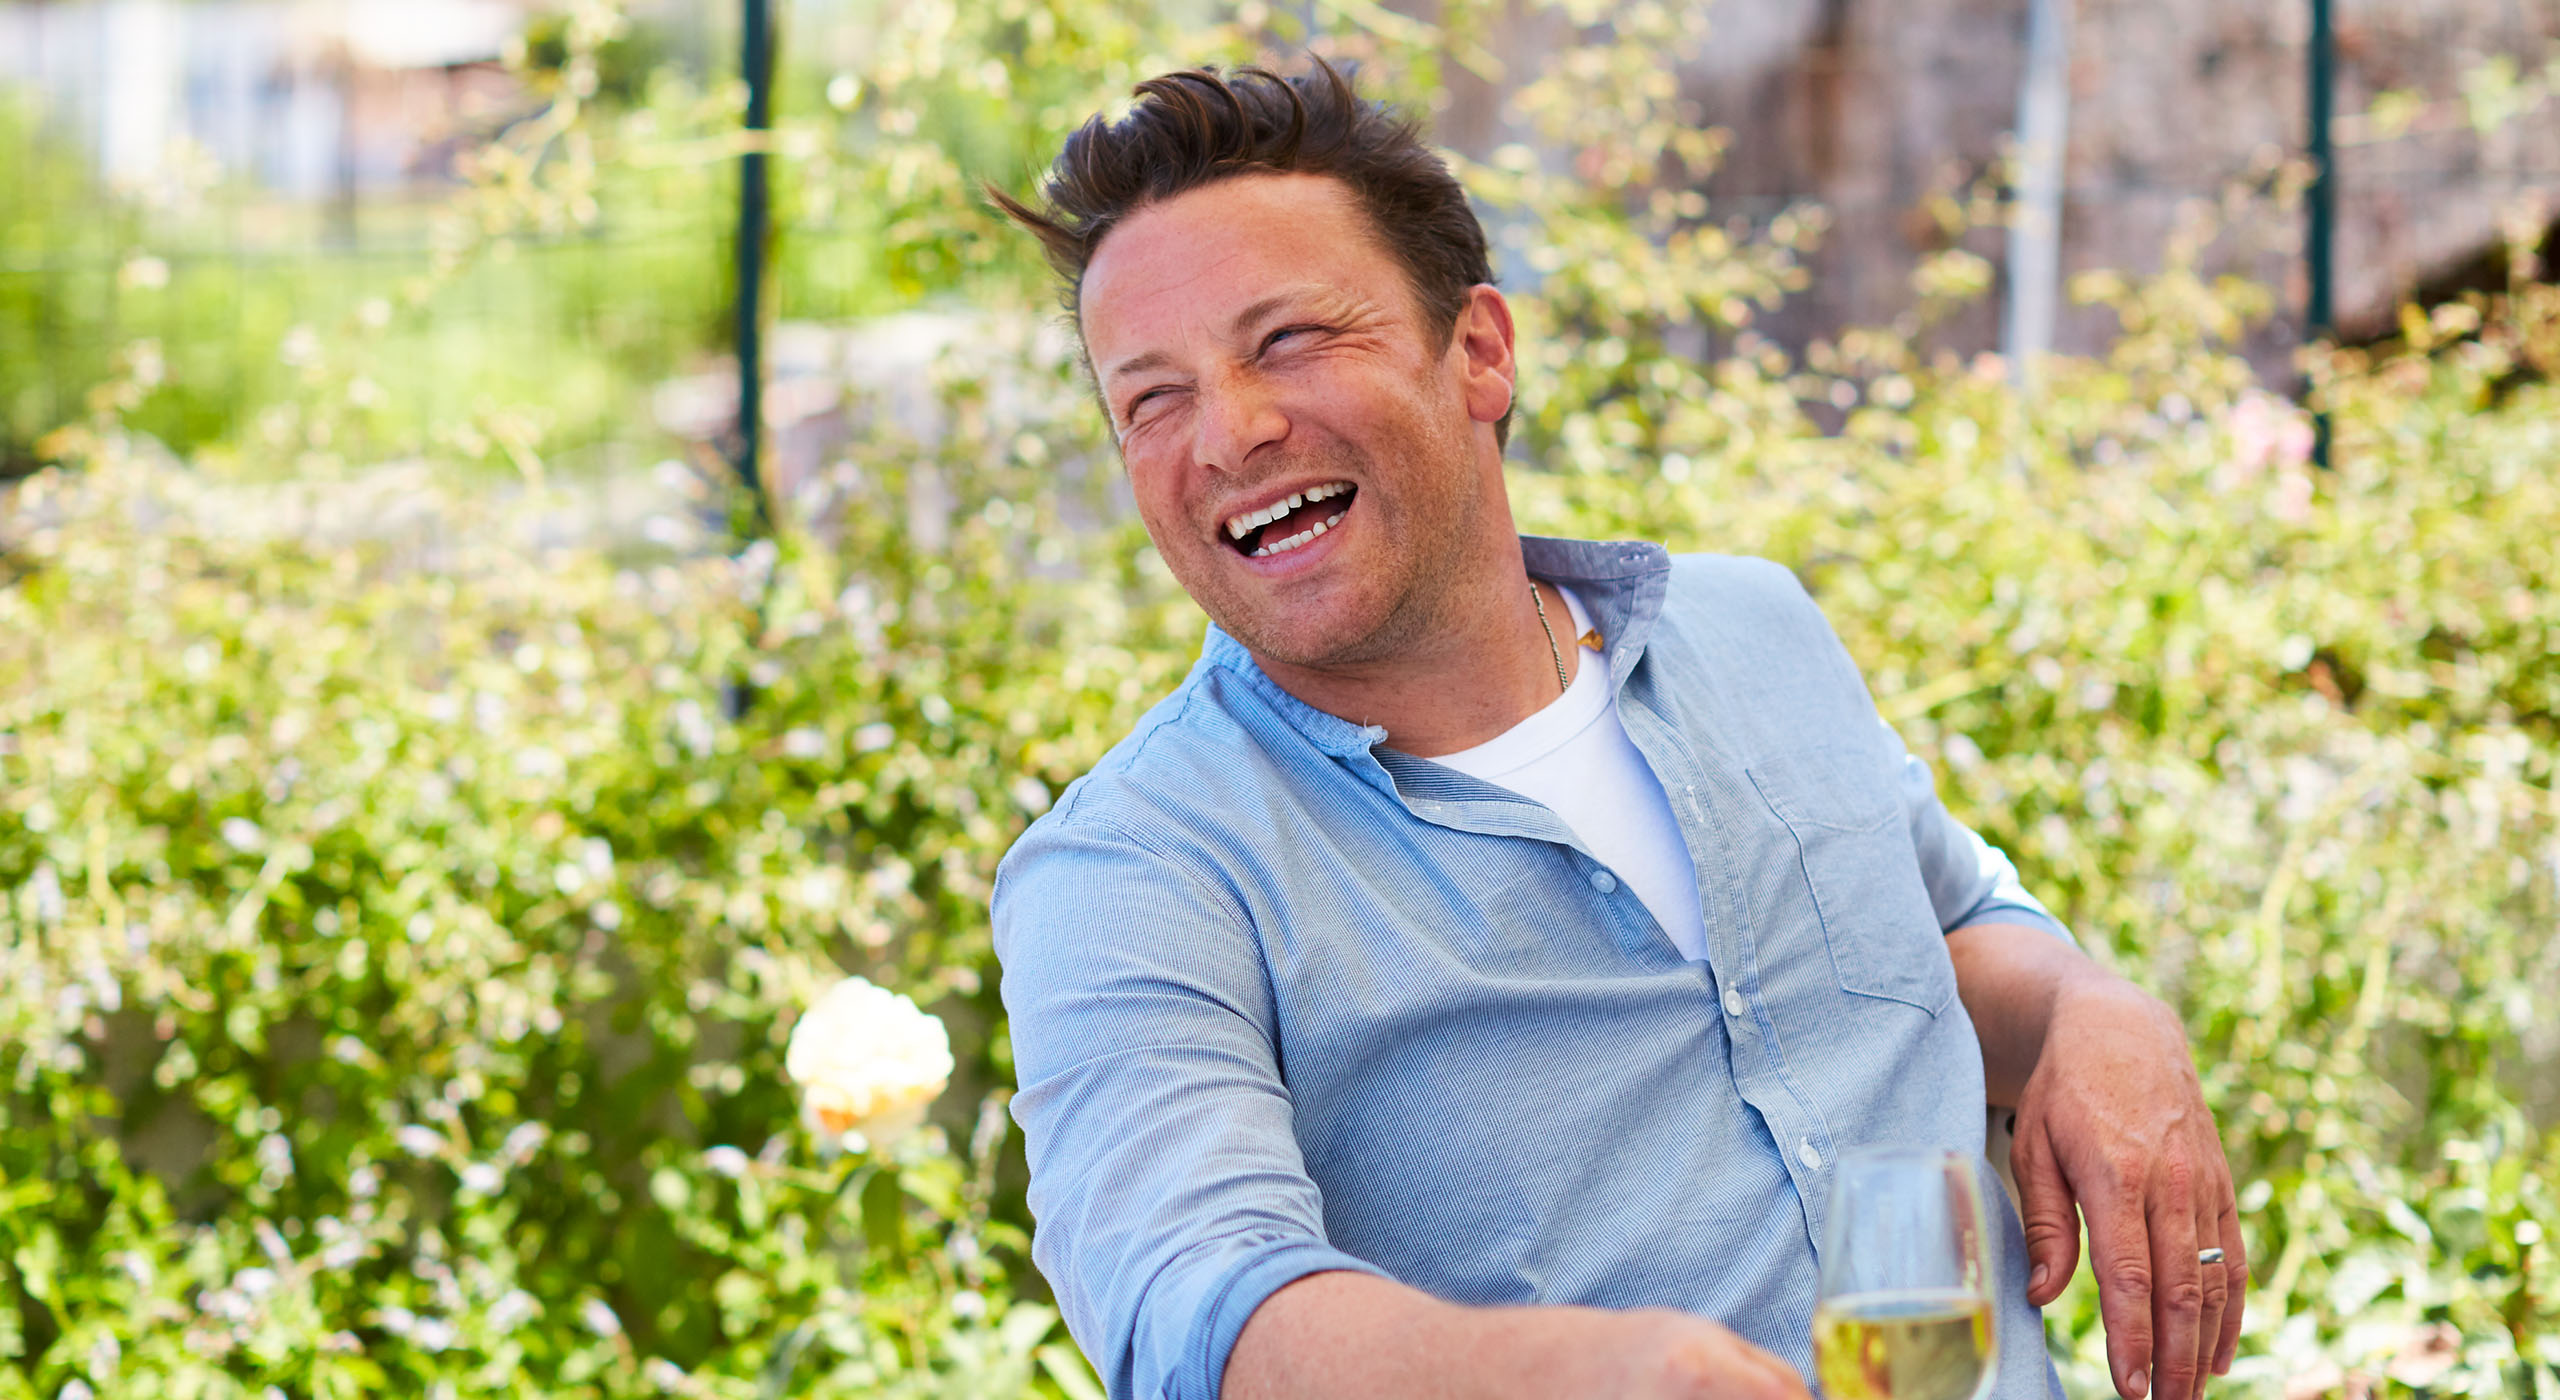 Jamie Oliver's New Cookbook: A Conversation with the Super Chef!